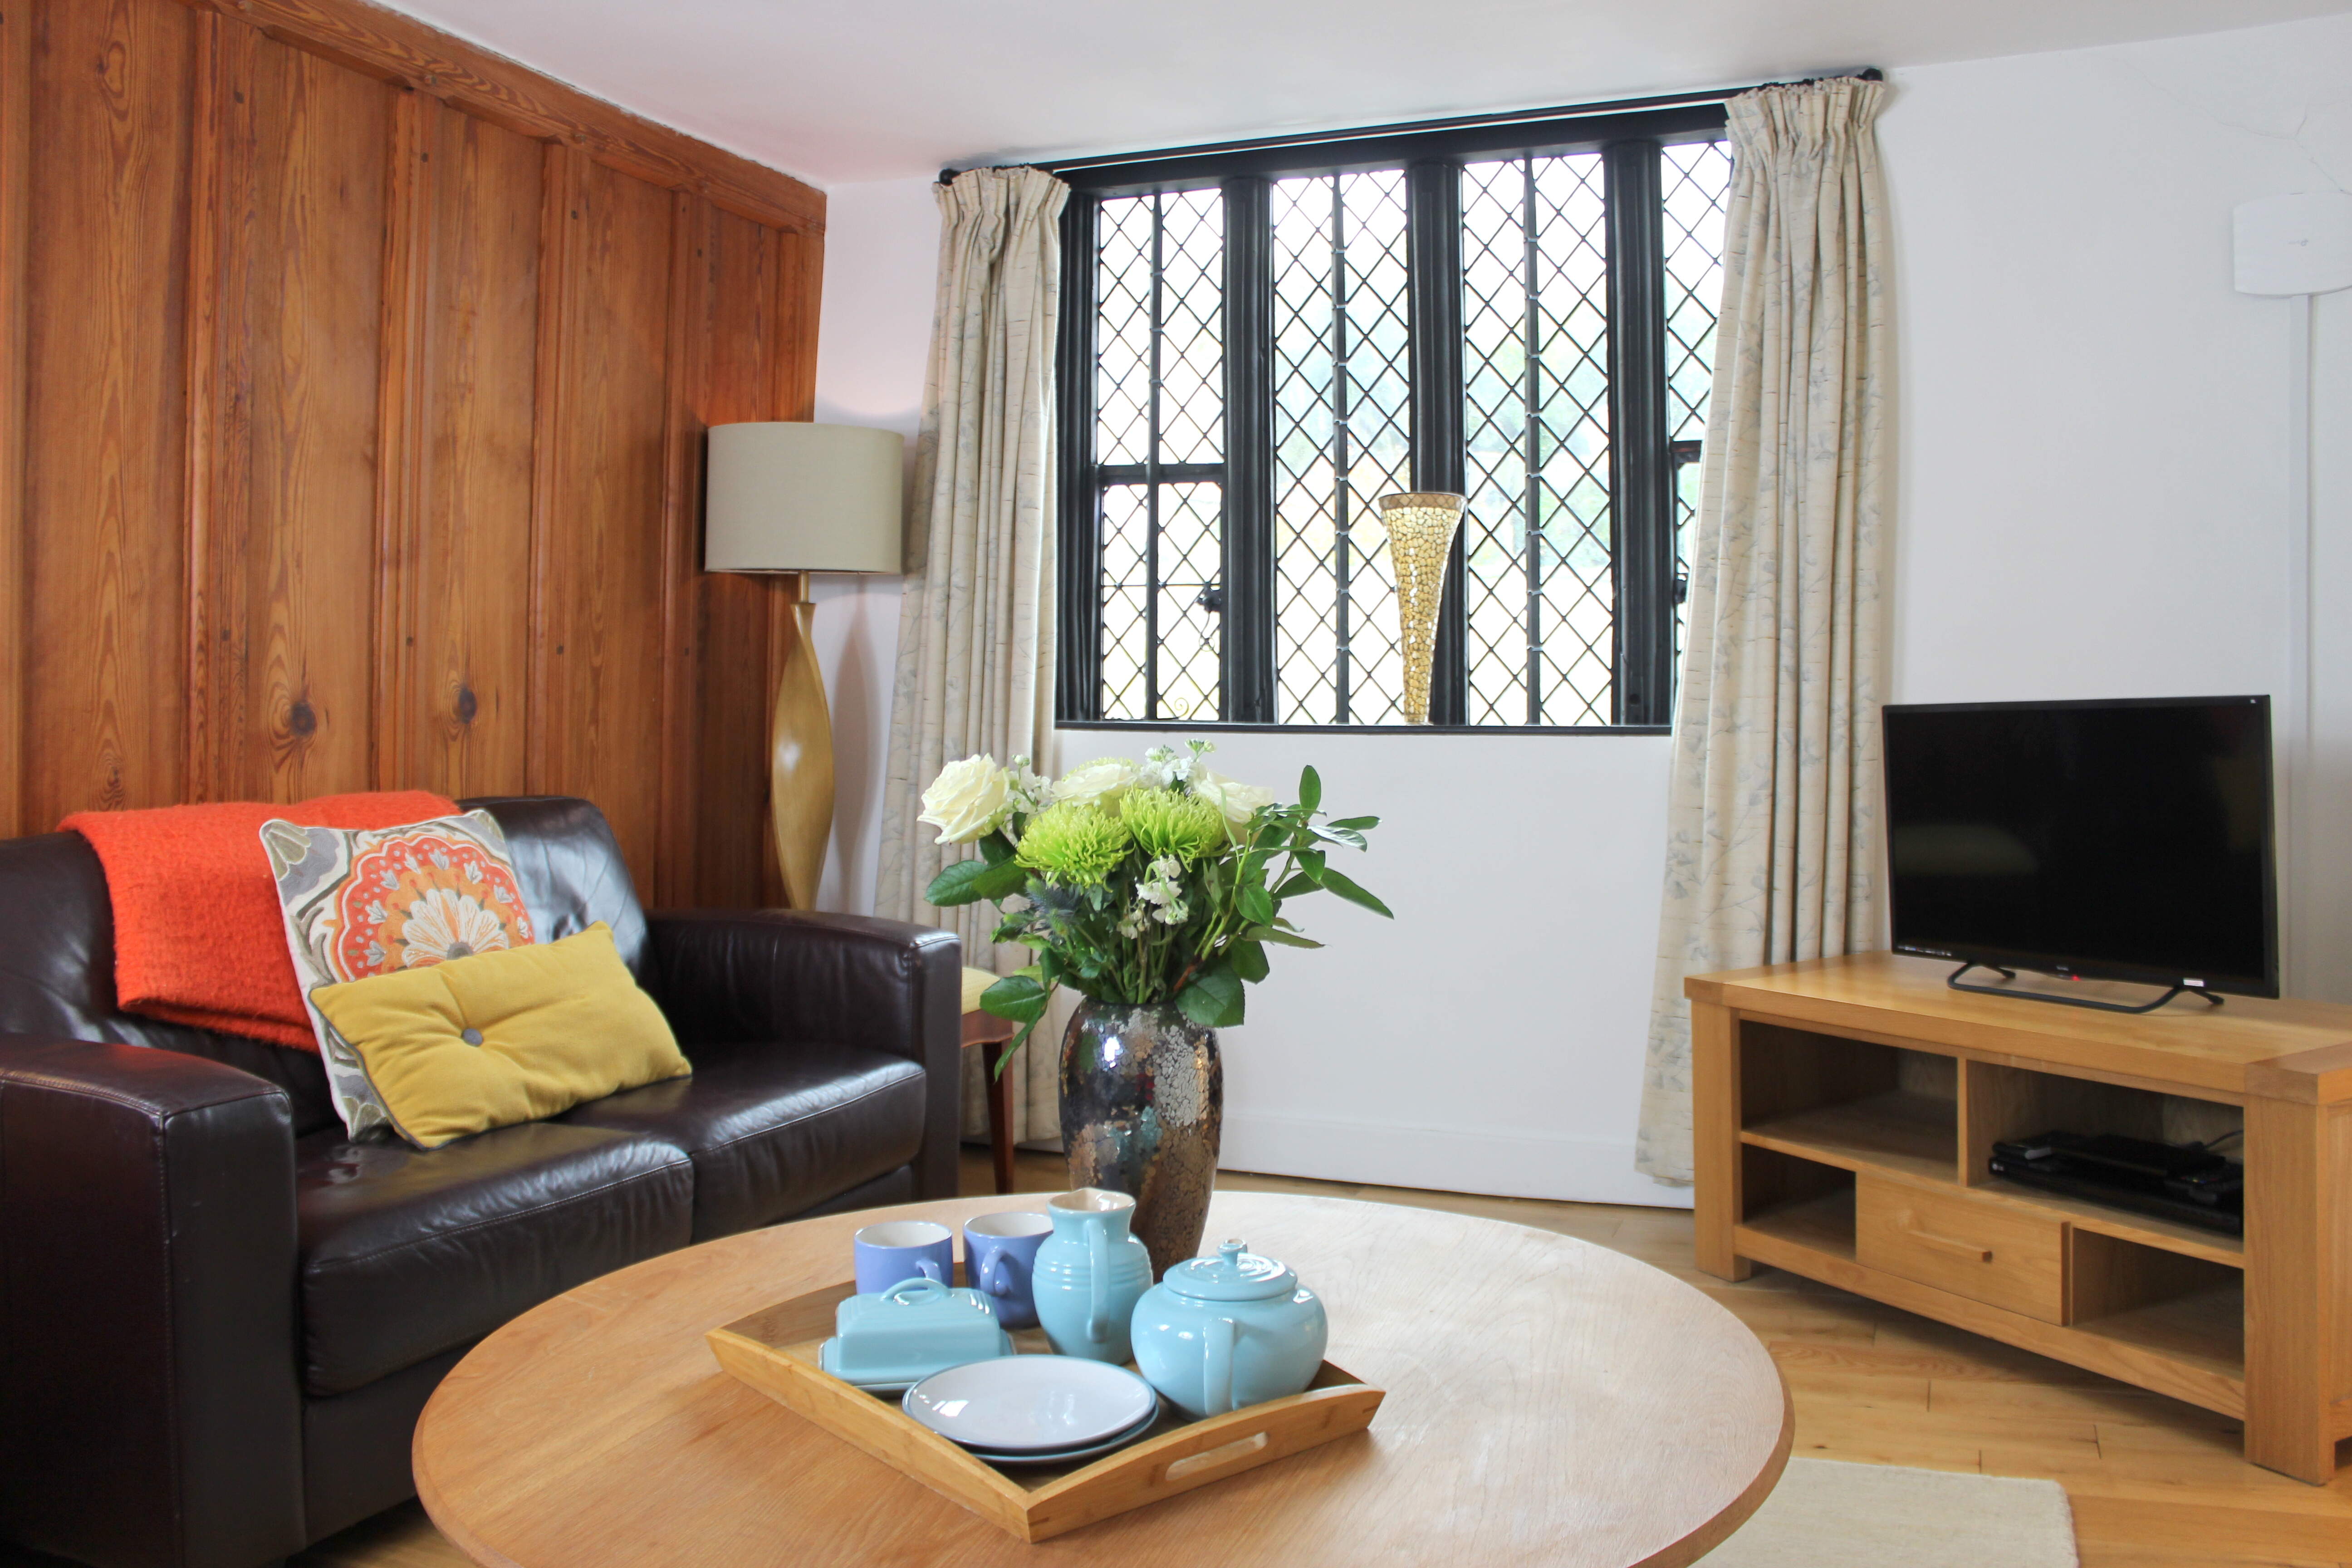 Holiday Apartments in Dartmouth with Ways Away Merchant's Rise. Sleeps 5